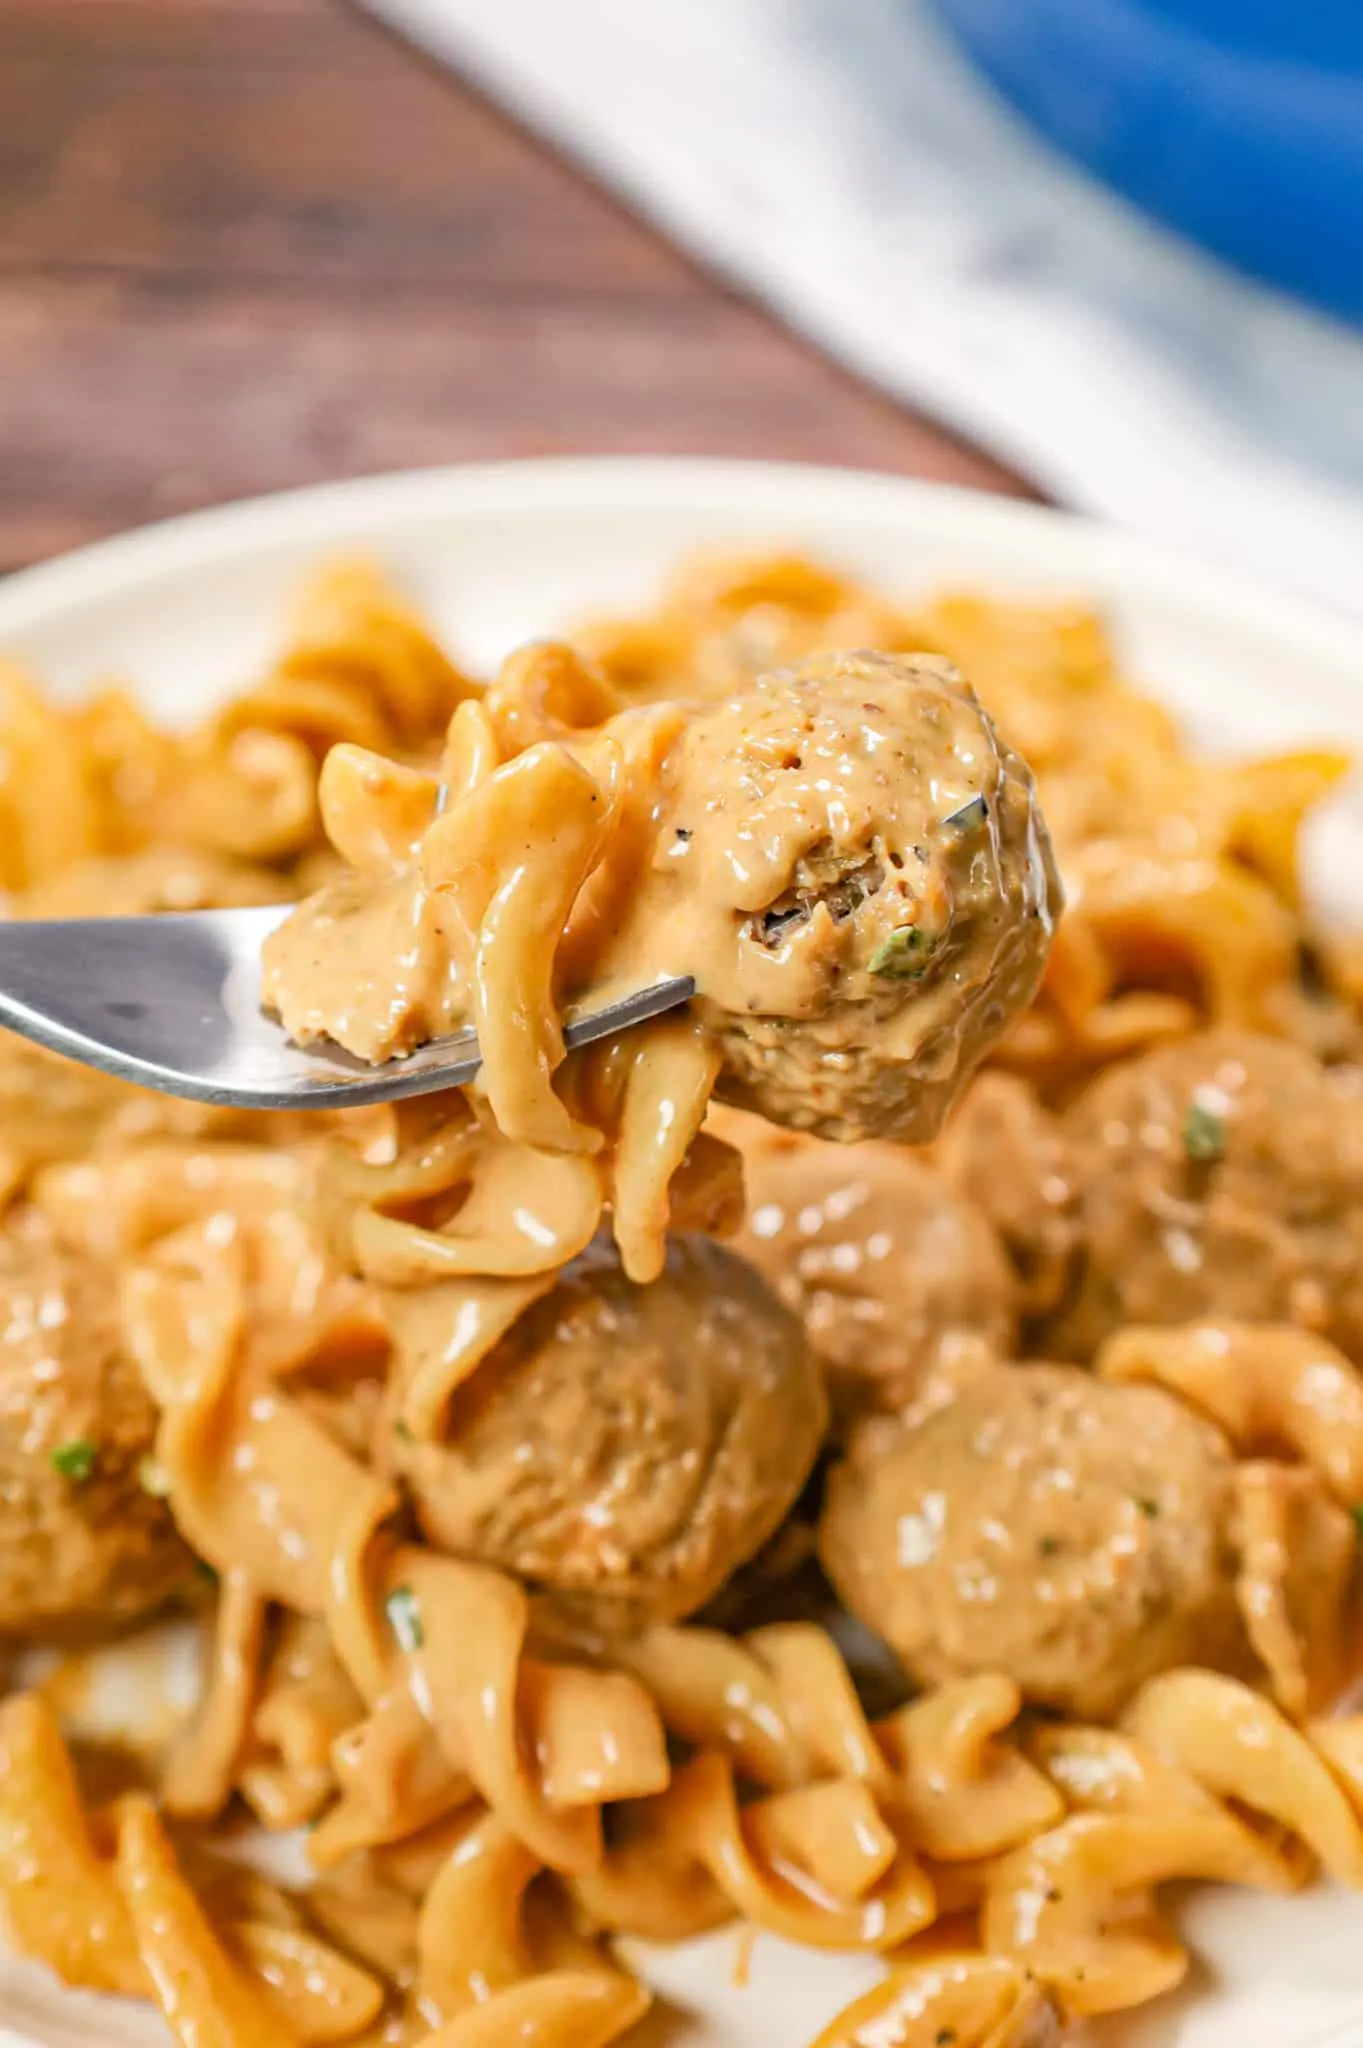 Meatball Stroganoff is an easy dinner recipe with egg noodles, diced onions, sliced mushrooms and store bought meatballs all tossed in a beef gravy and sour cream mixture.